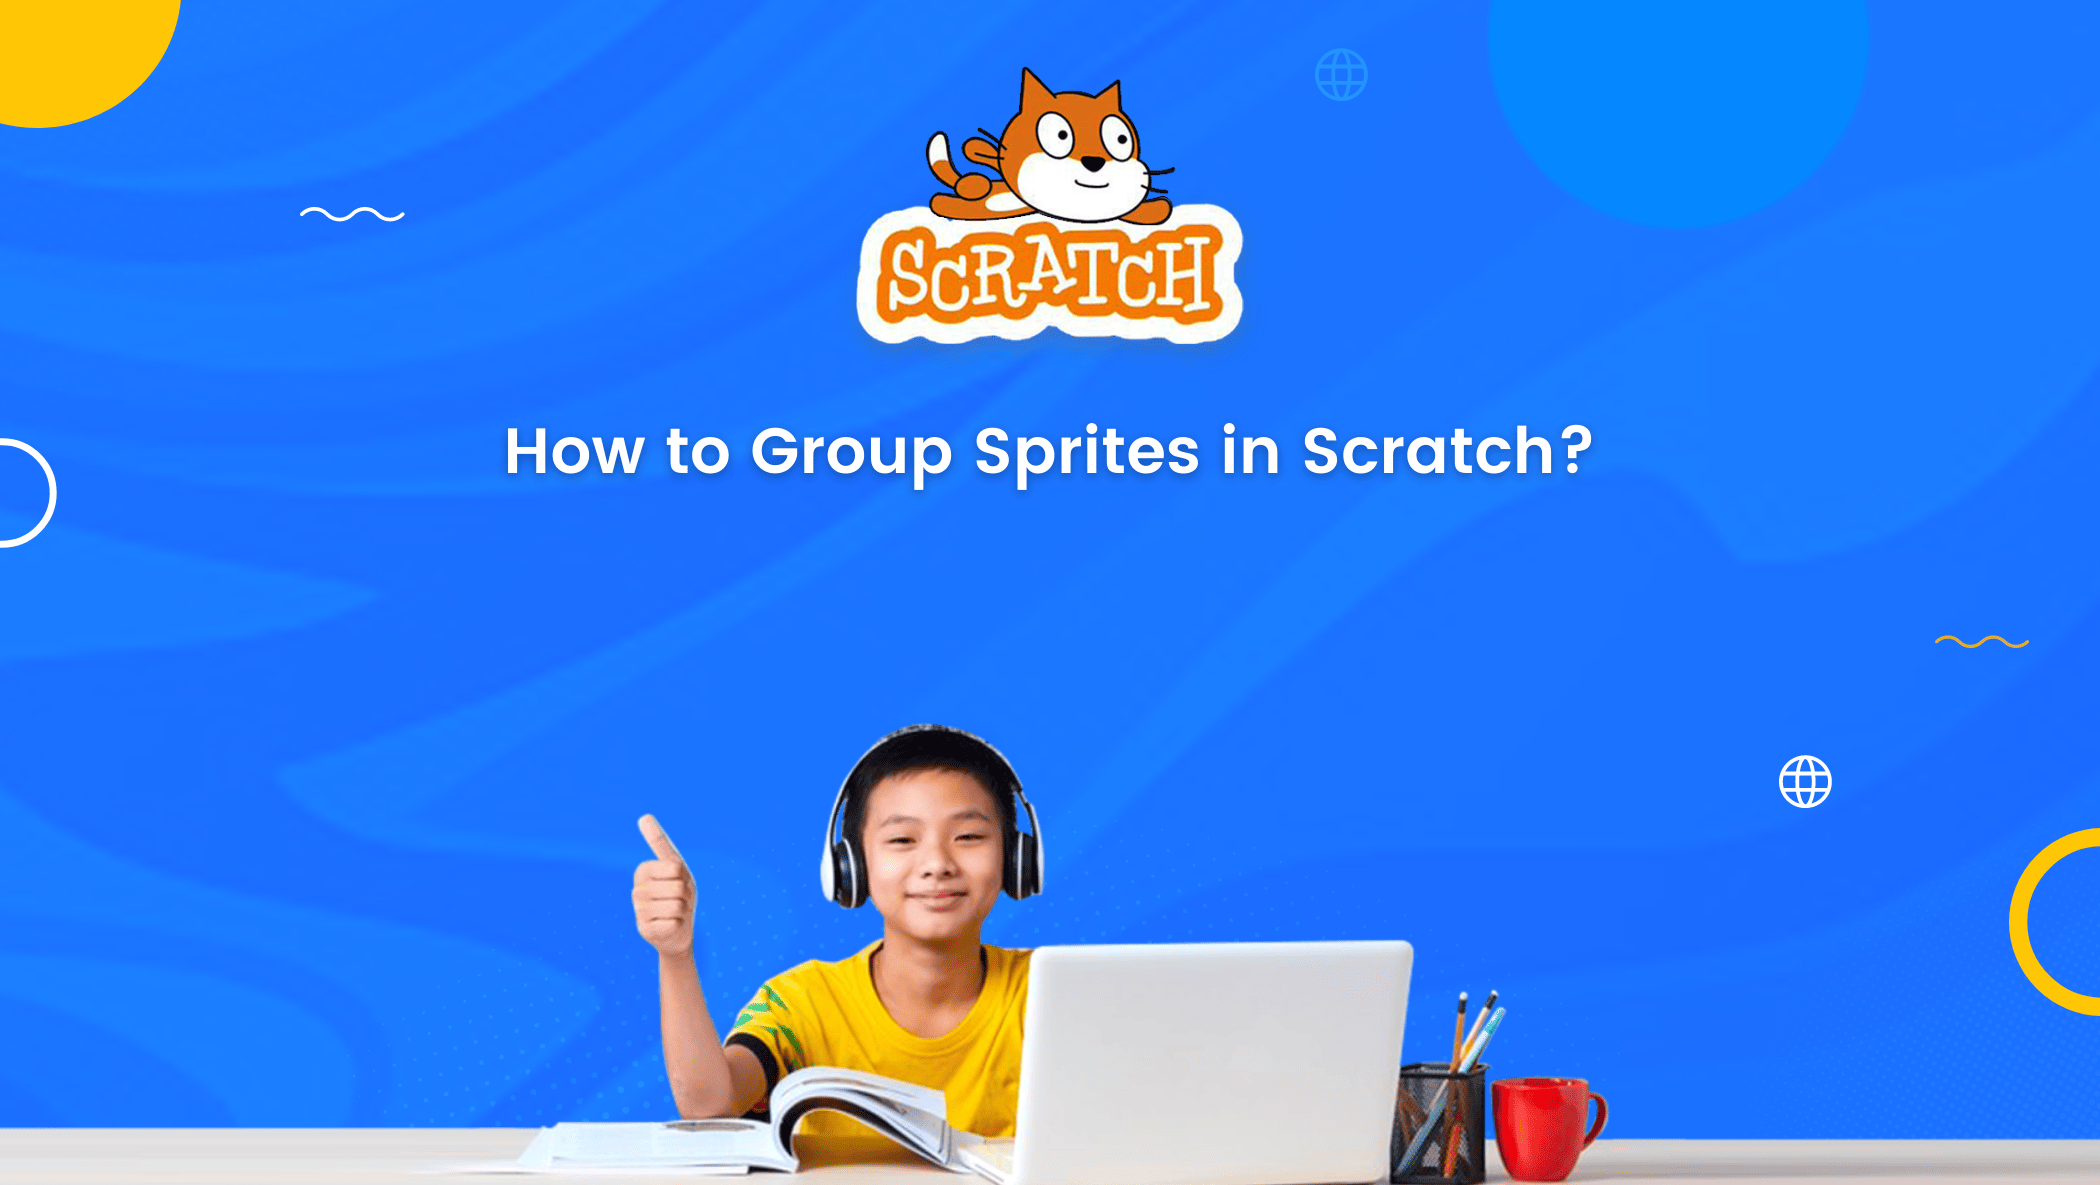 How do I make a procedure in scratch for linking the letters to